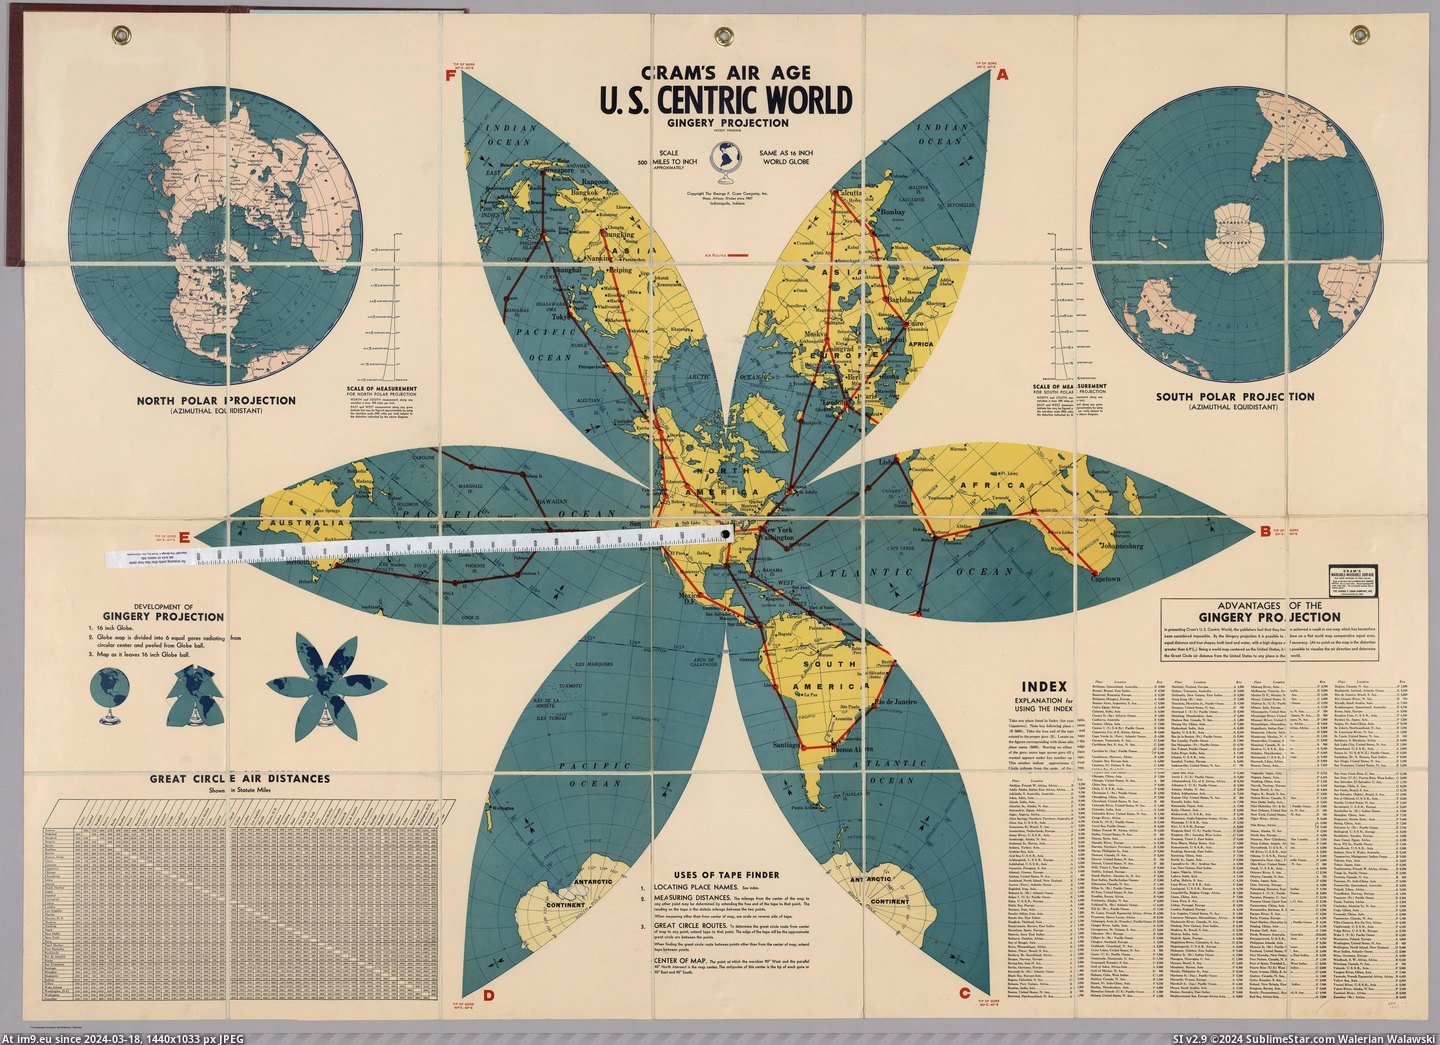 #World #Air #Age #Centric #Gingery #Projection #Est #Cram [Mapporn] The Gingery projection. 'Cram's air age. US centric world', est. 1943 [5907x4248] Pic. (Изображение из альбом My r/MAPS favs))